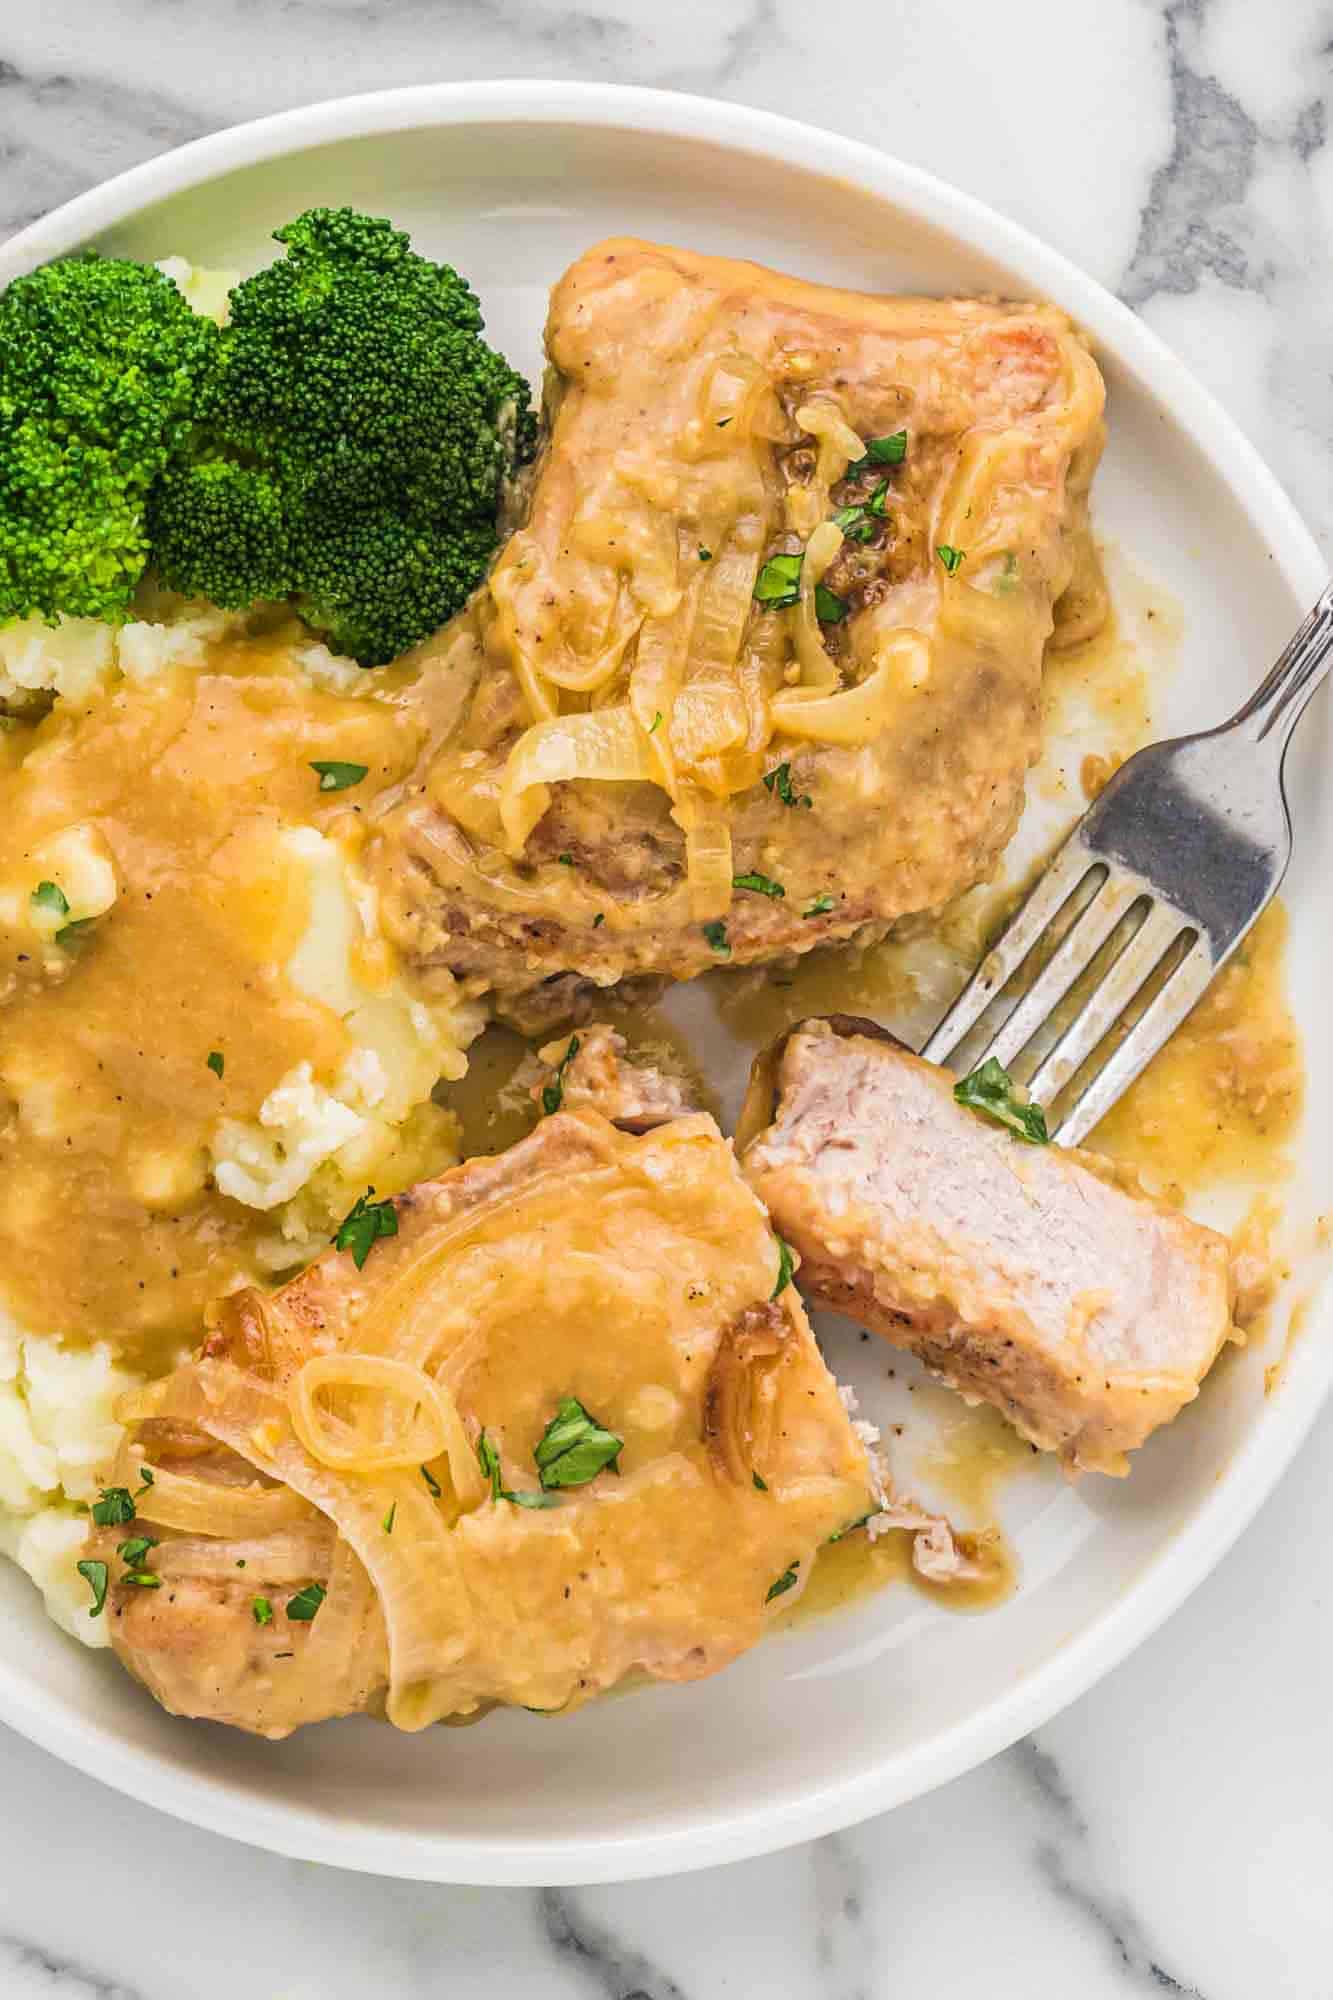 Slow cooker pork chops in a white plate served with mashed potatoes and broccoli